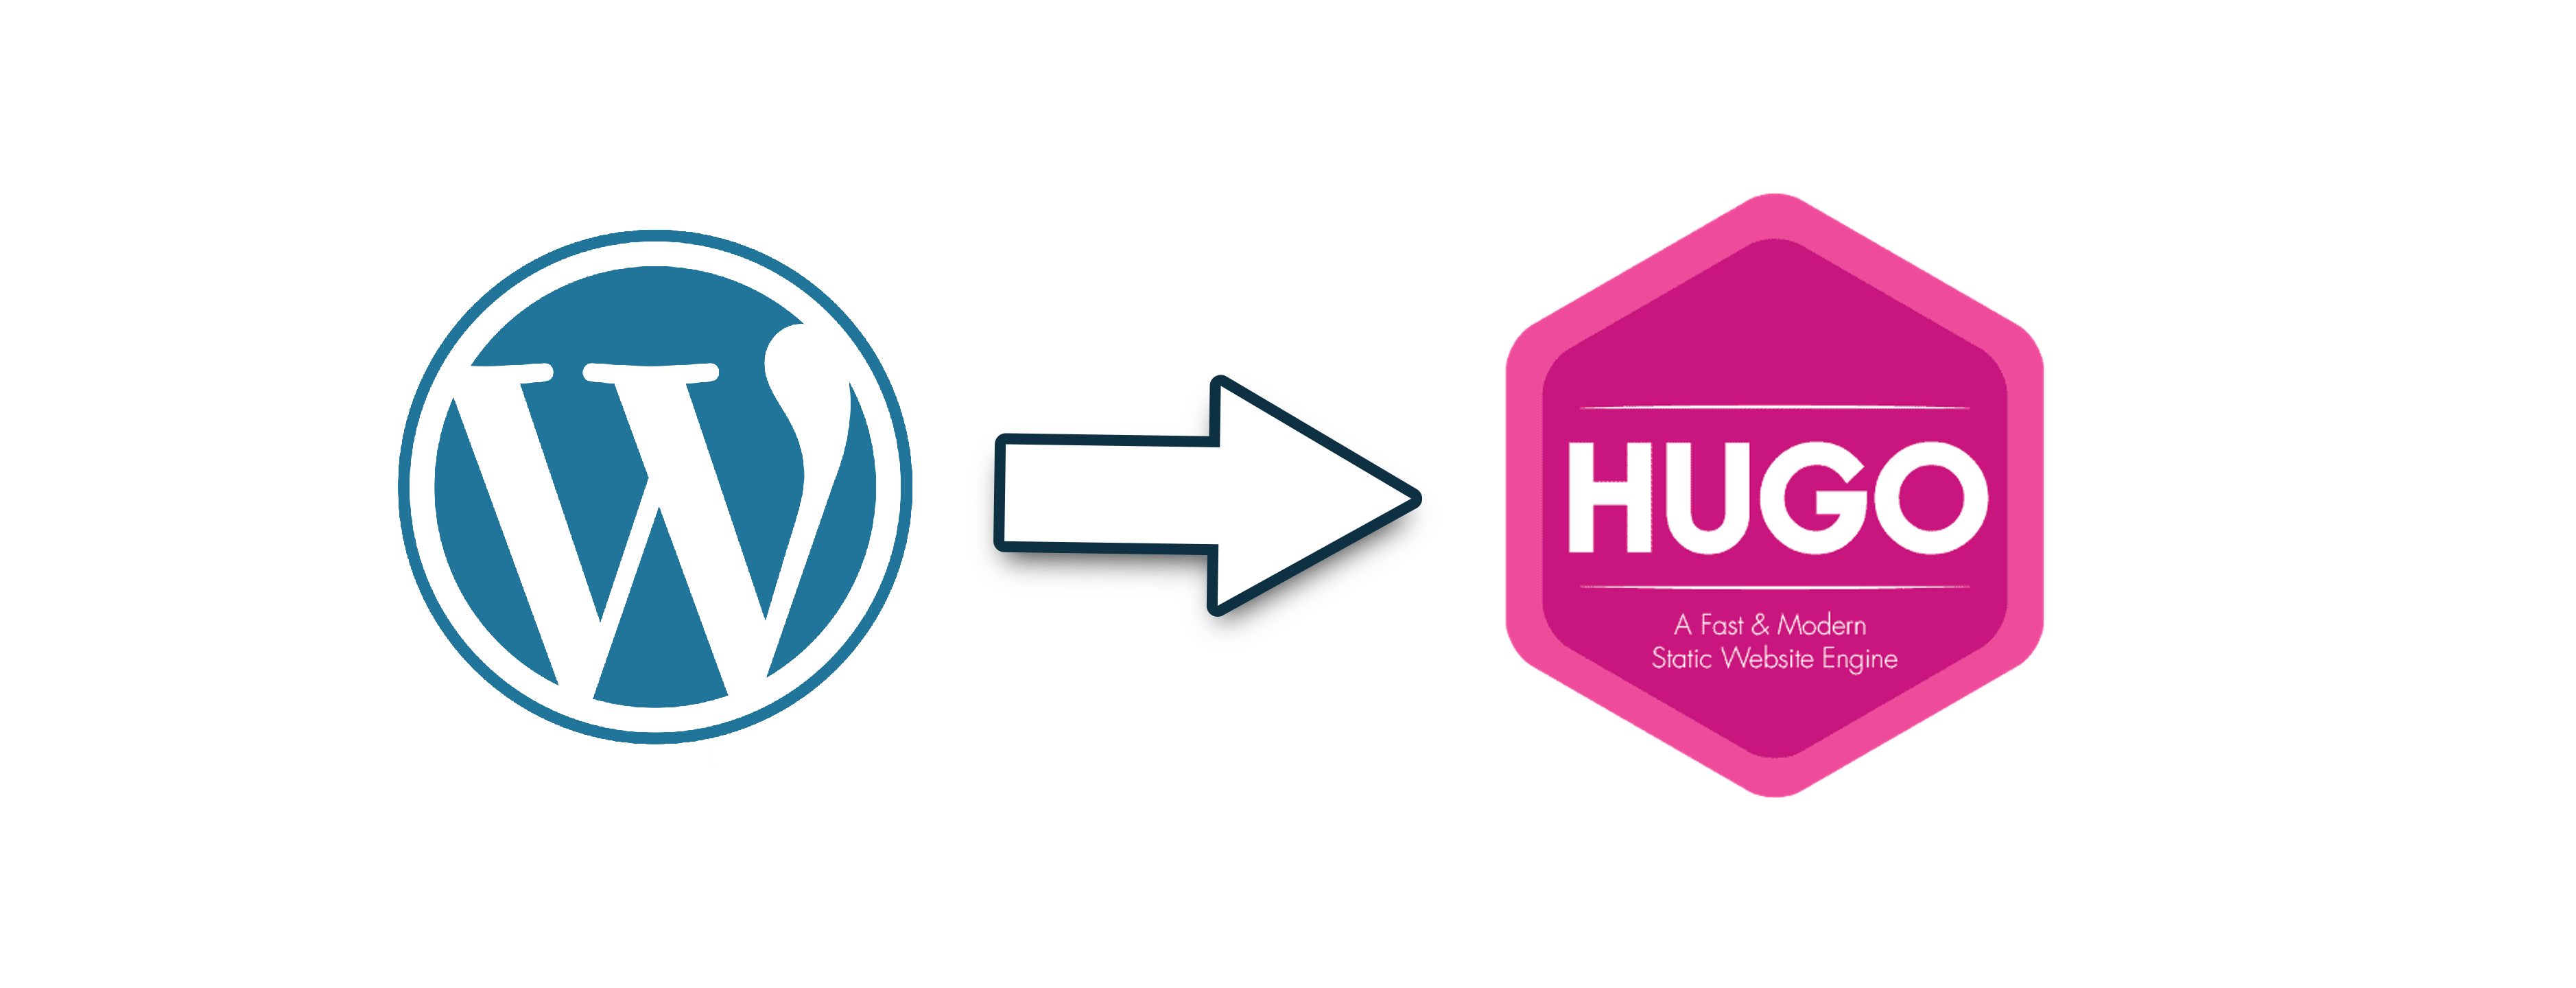 Related Content: Migrating a Website from WordPress to Hugo